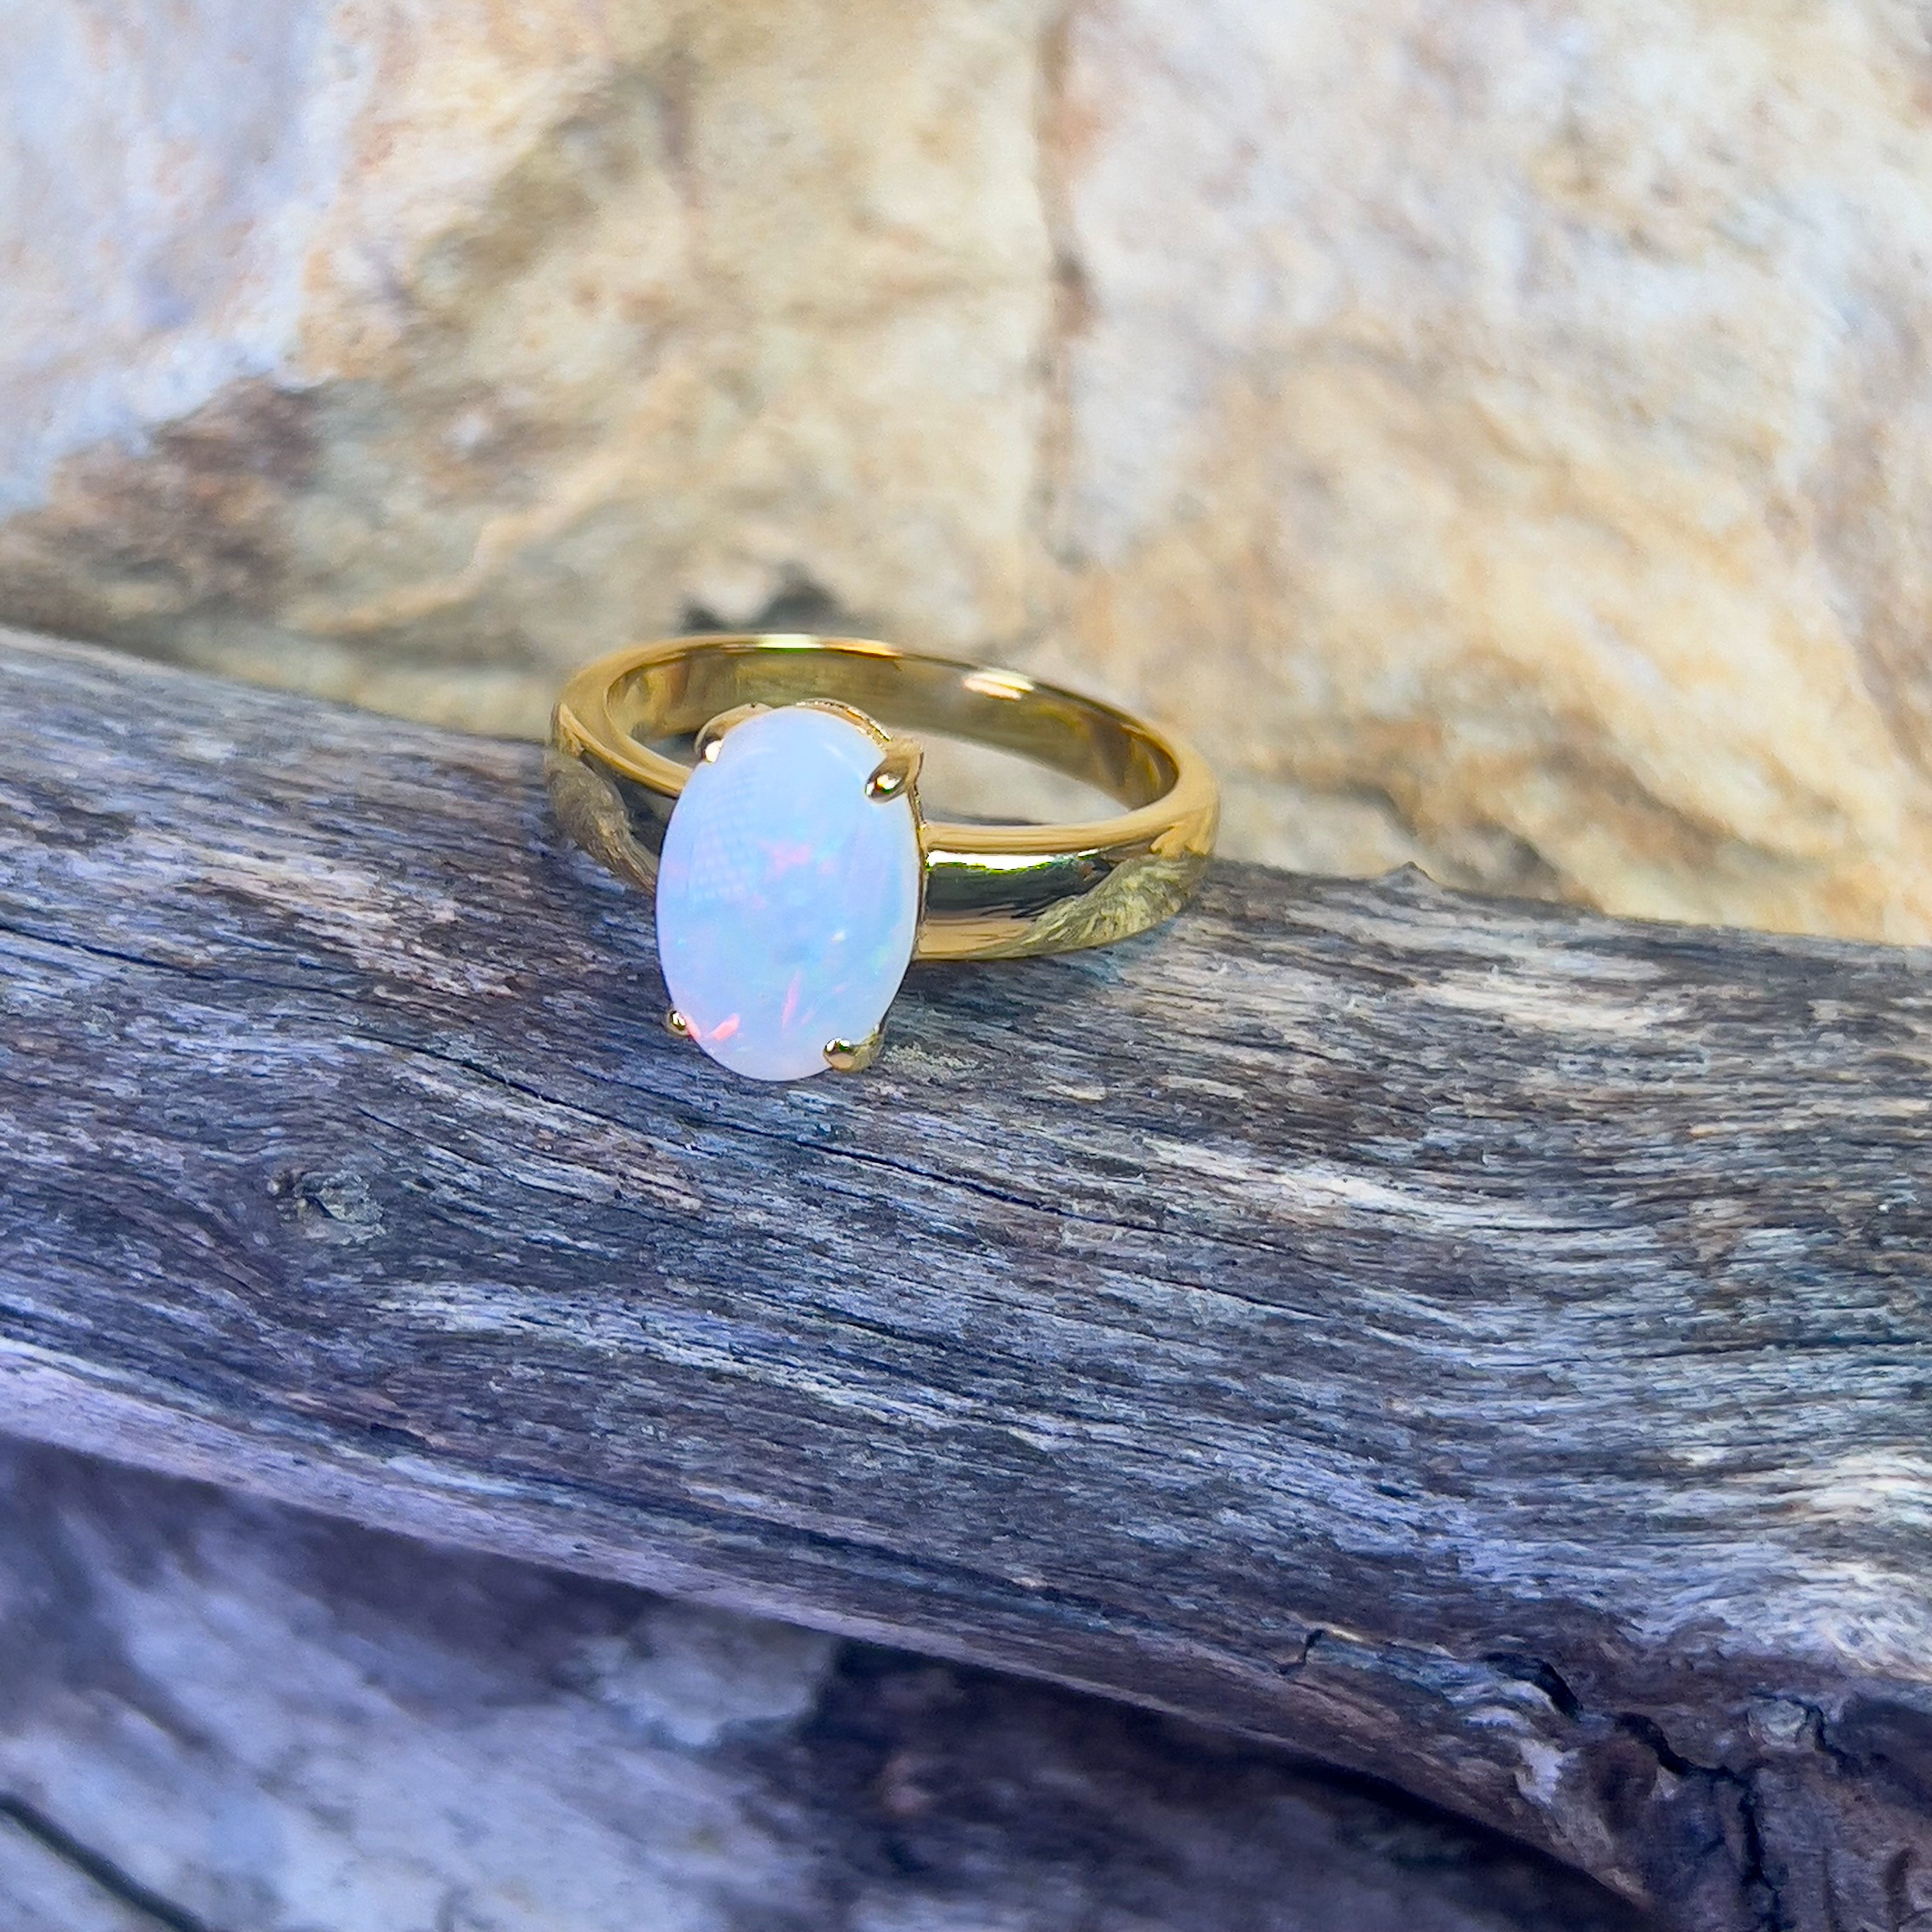 Gold plated sterling silver solitaire White Opal 1.5ct ring - Masterpiece Jewellery Opal & Gems Sydney Australia | Online Shop